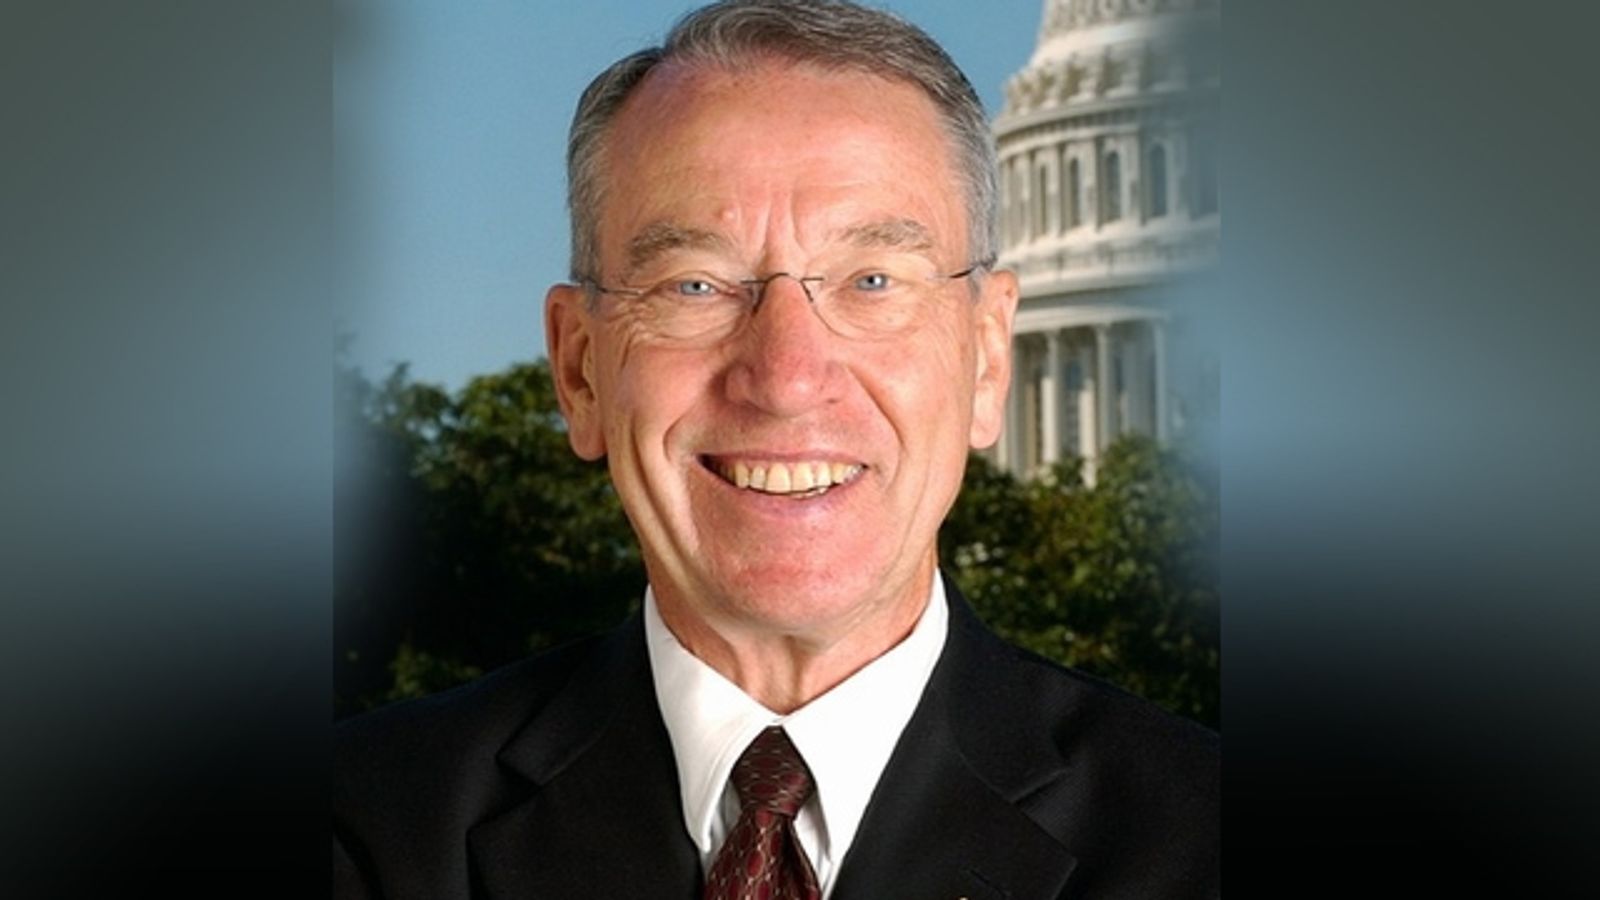 Grassley Seeks Porn Viewing Info From National Science Foundation